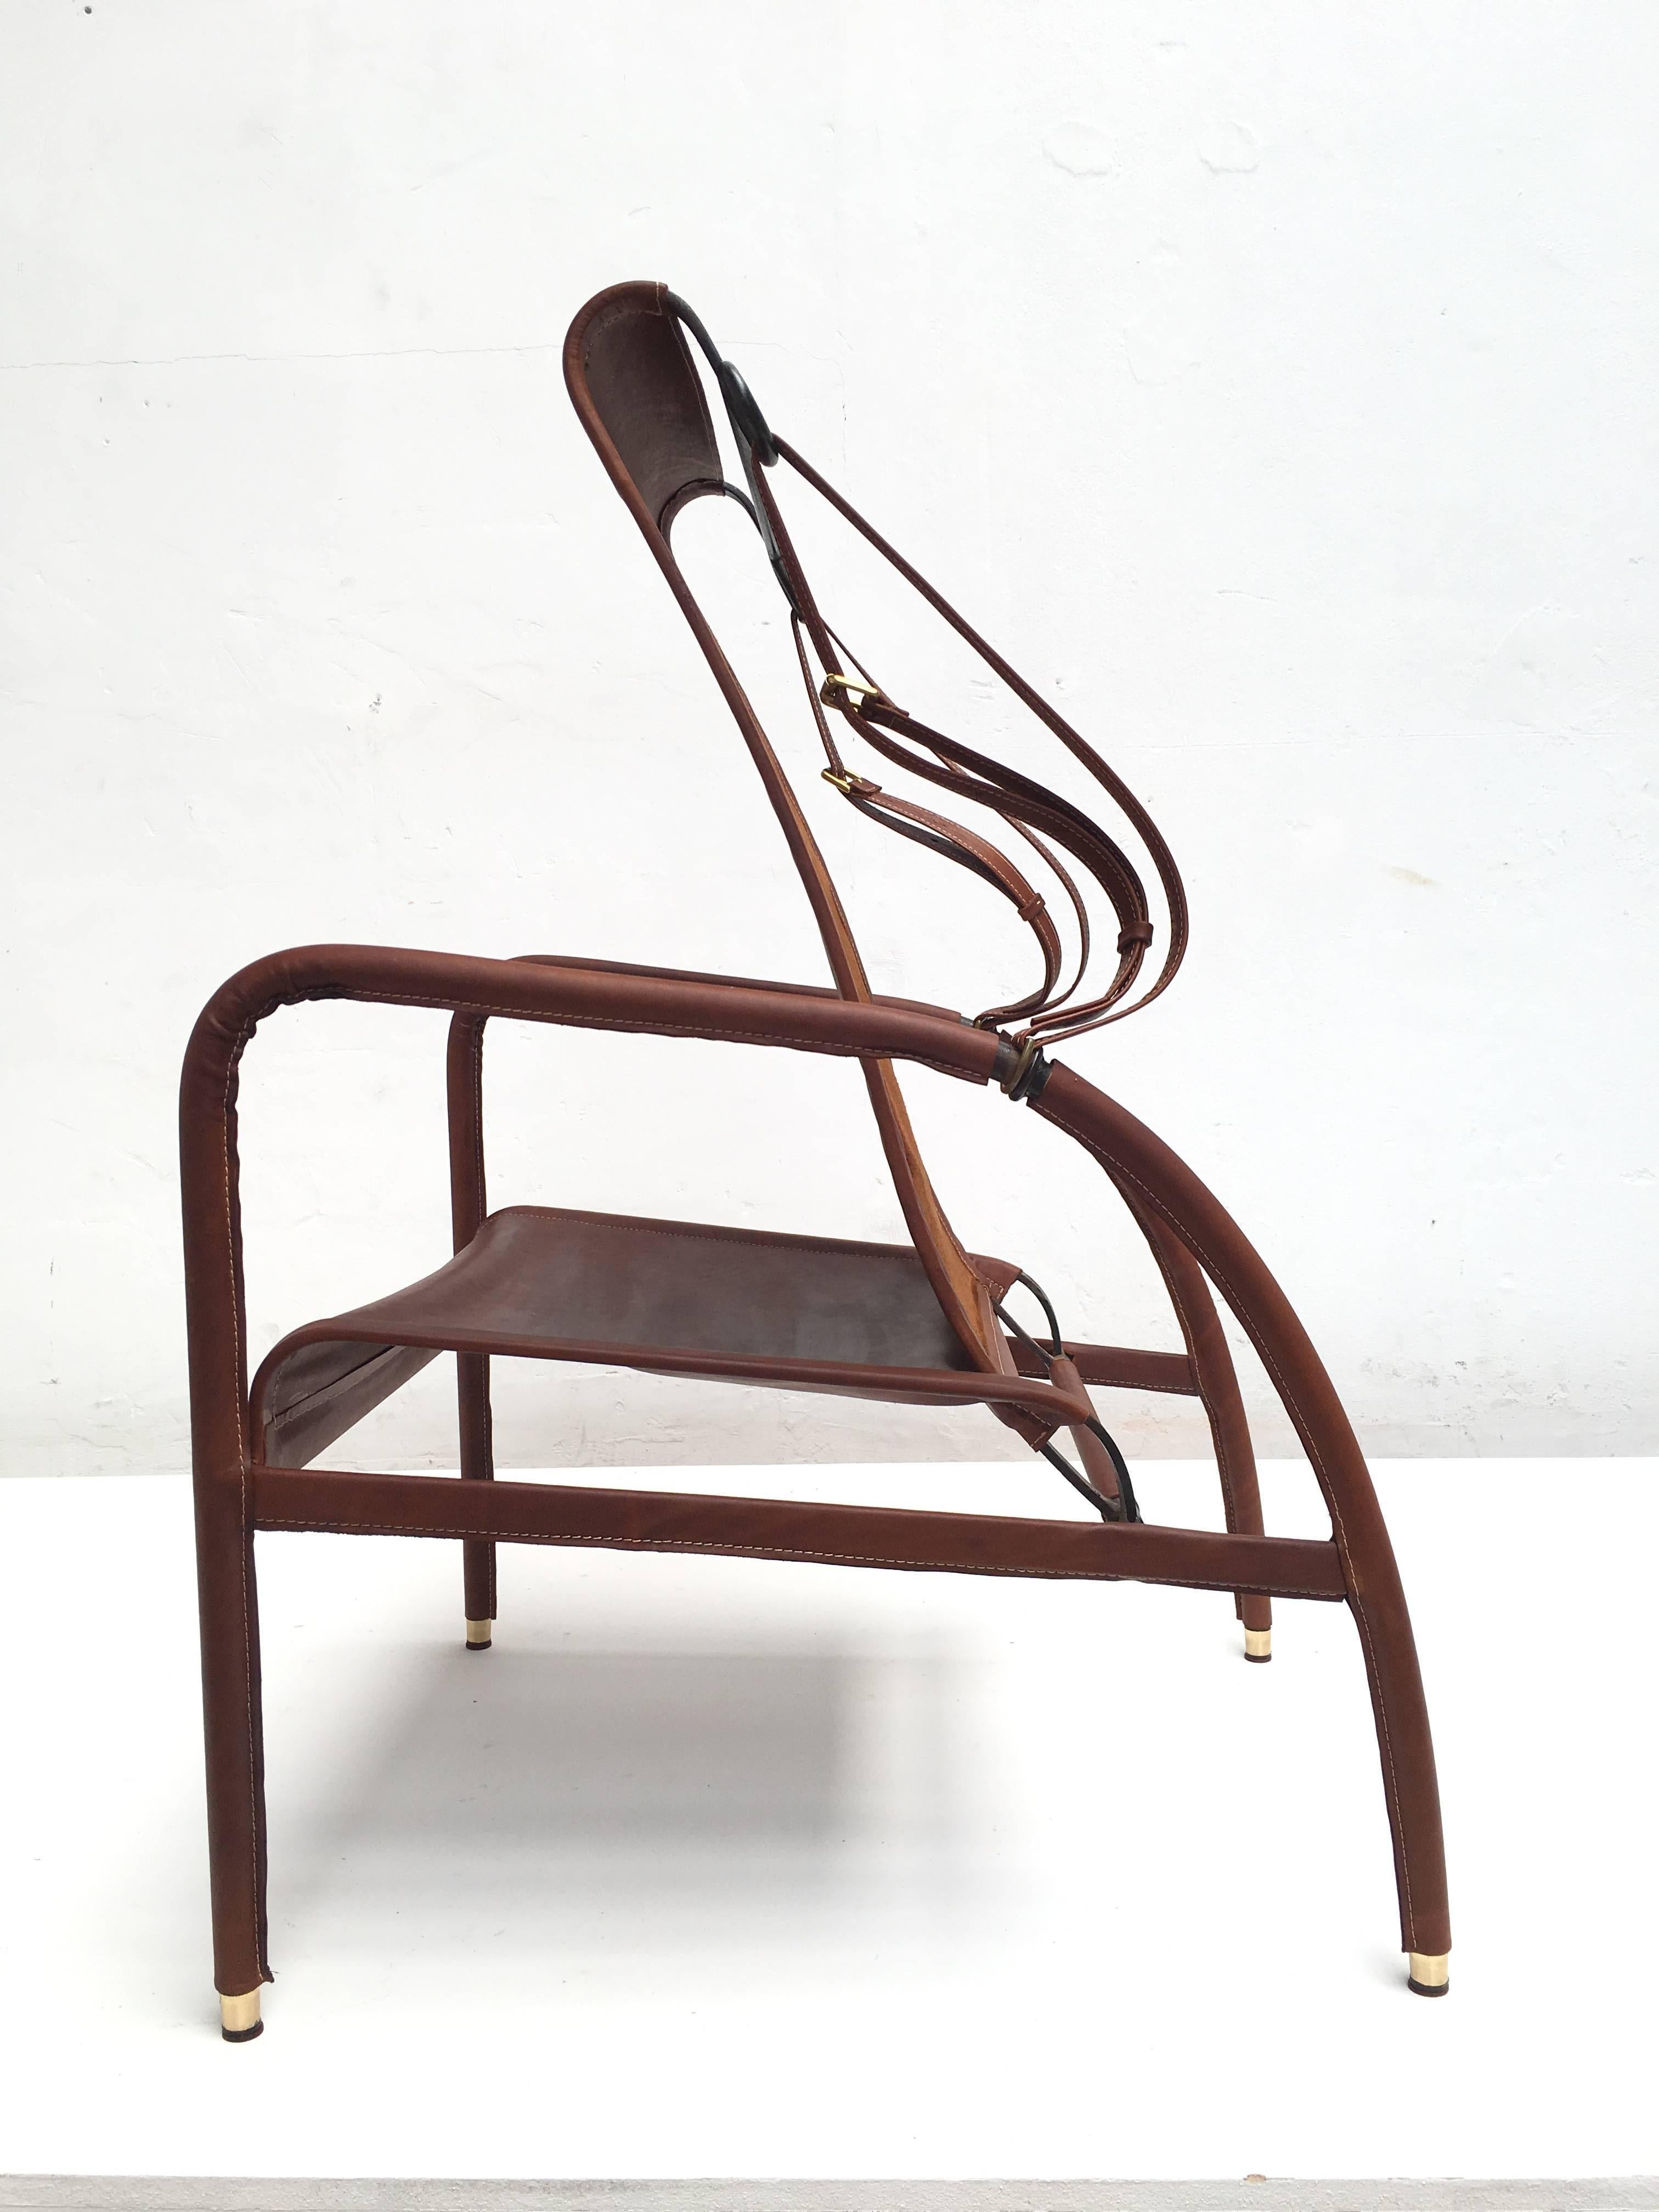 Mid-Century Modern Jacques Adnet Lounge Chair Restored with Photos of Restoration Process, 1950